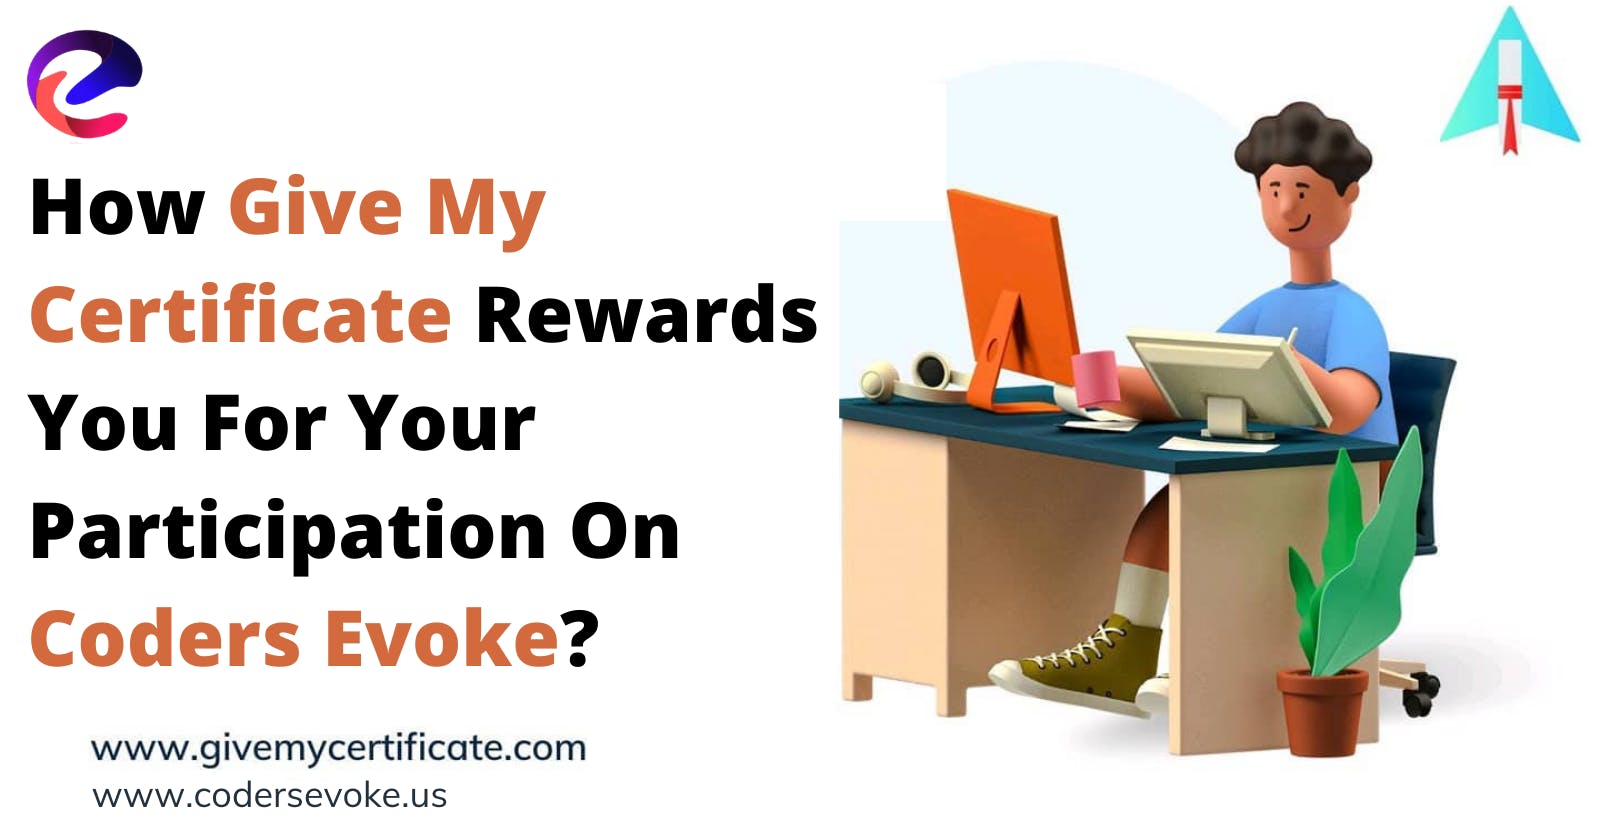 How Give My Certificate Rewards You For Your Participation On Coders Evoke?